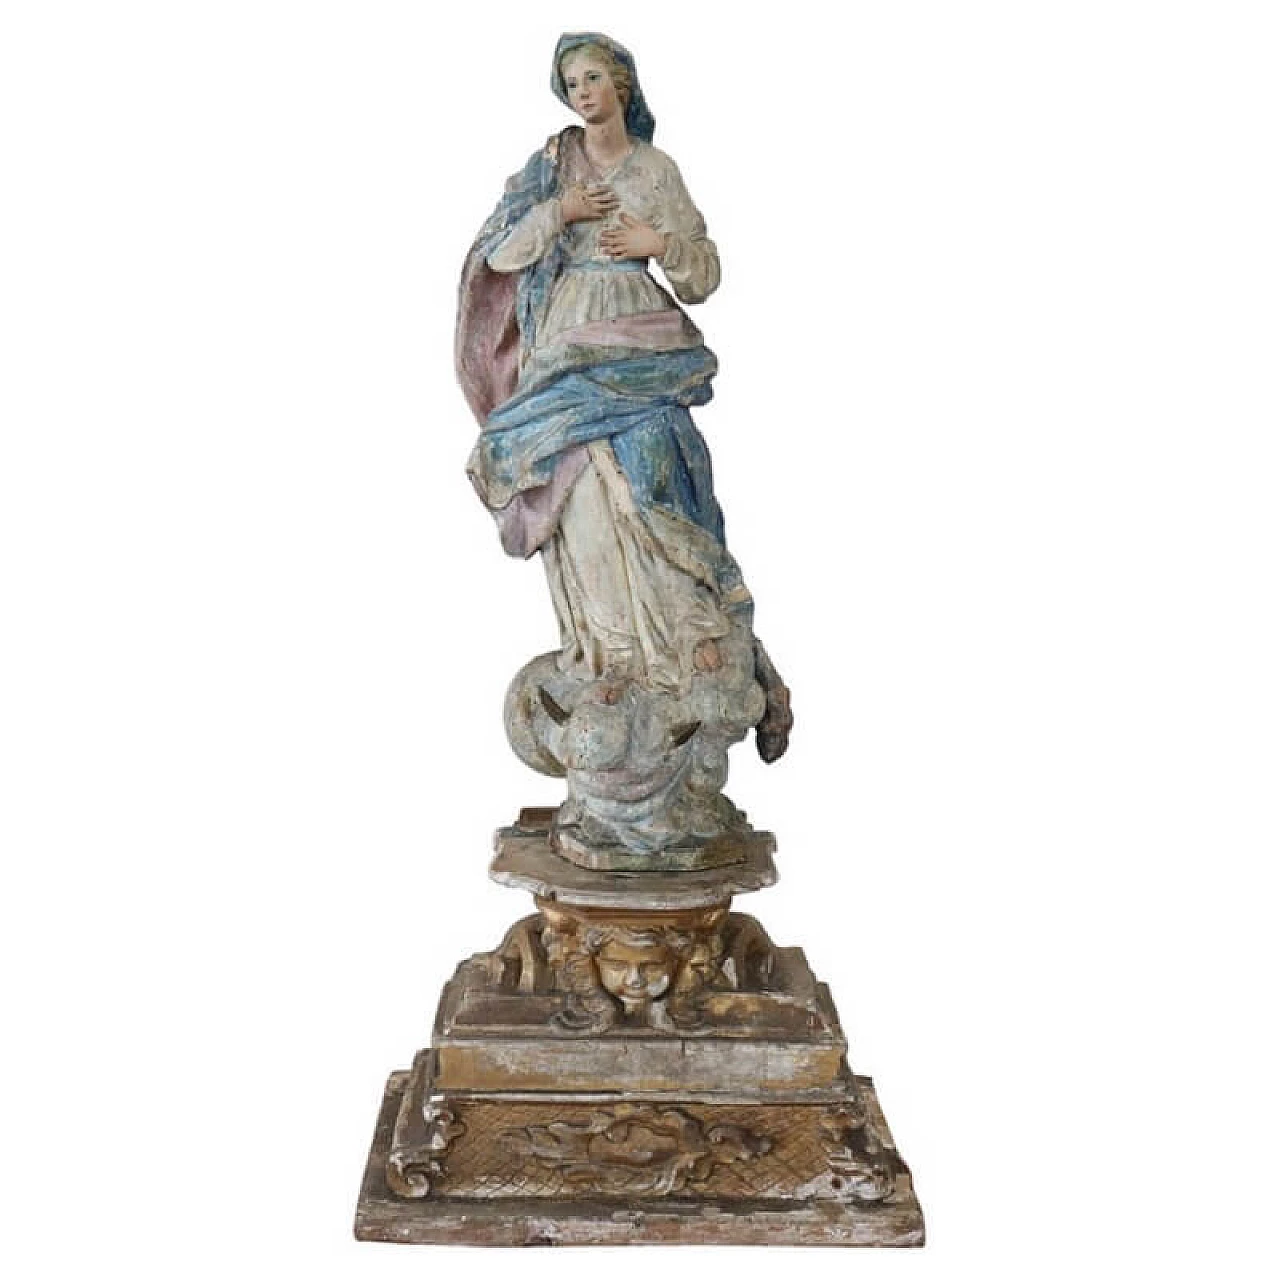 Virgin Mary, polychrome carved wooden sculpture, mid-19th century 1